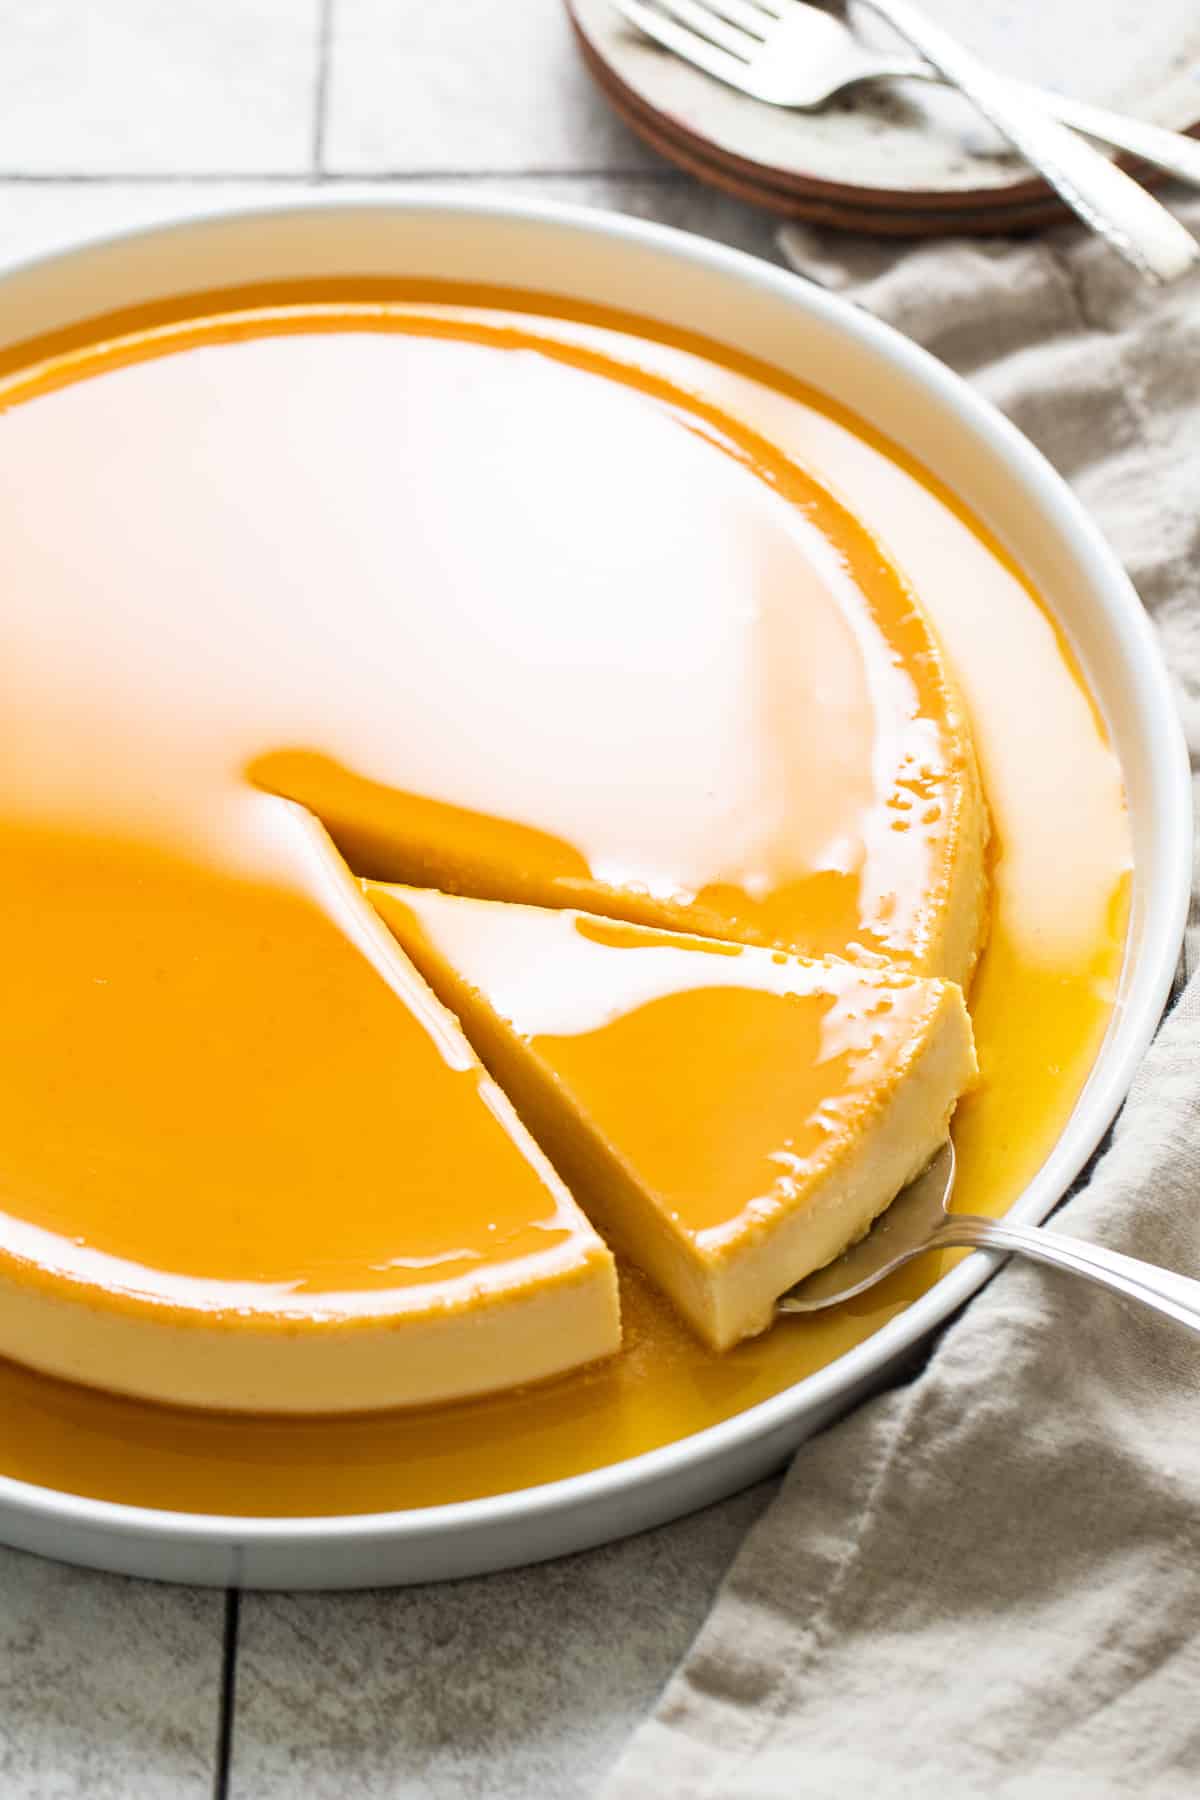 A slice of flan de queso on a serving spoon.